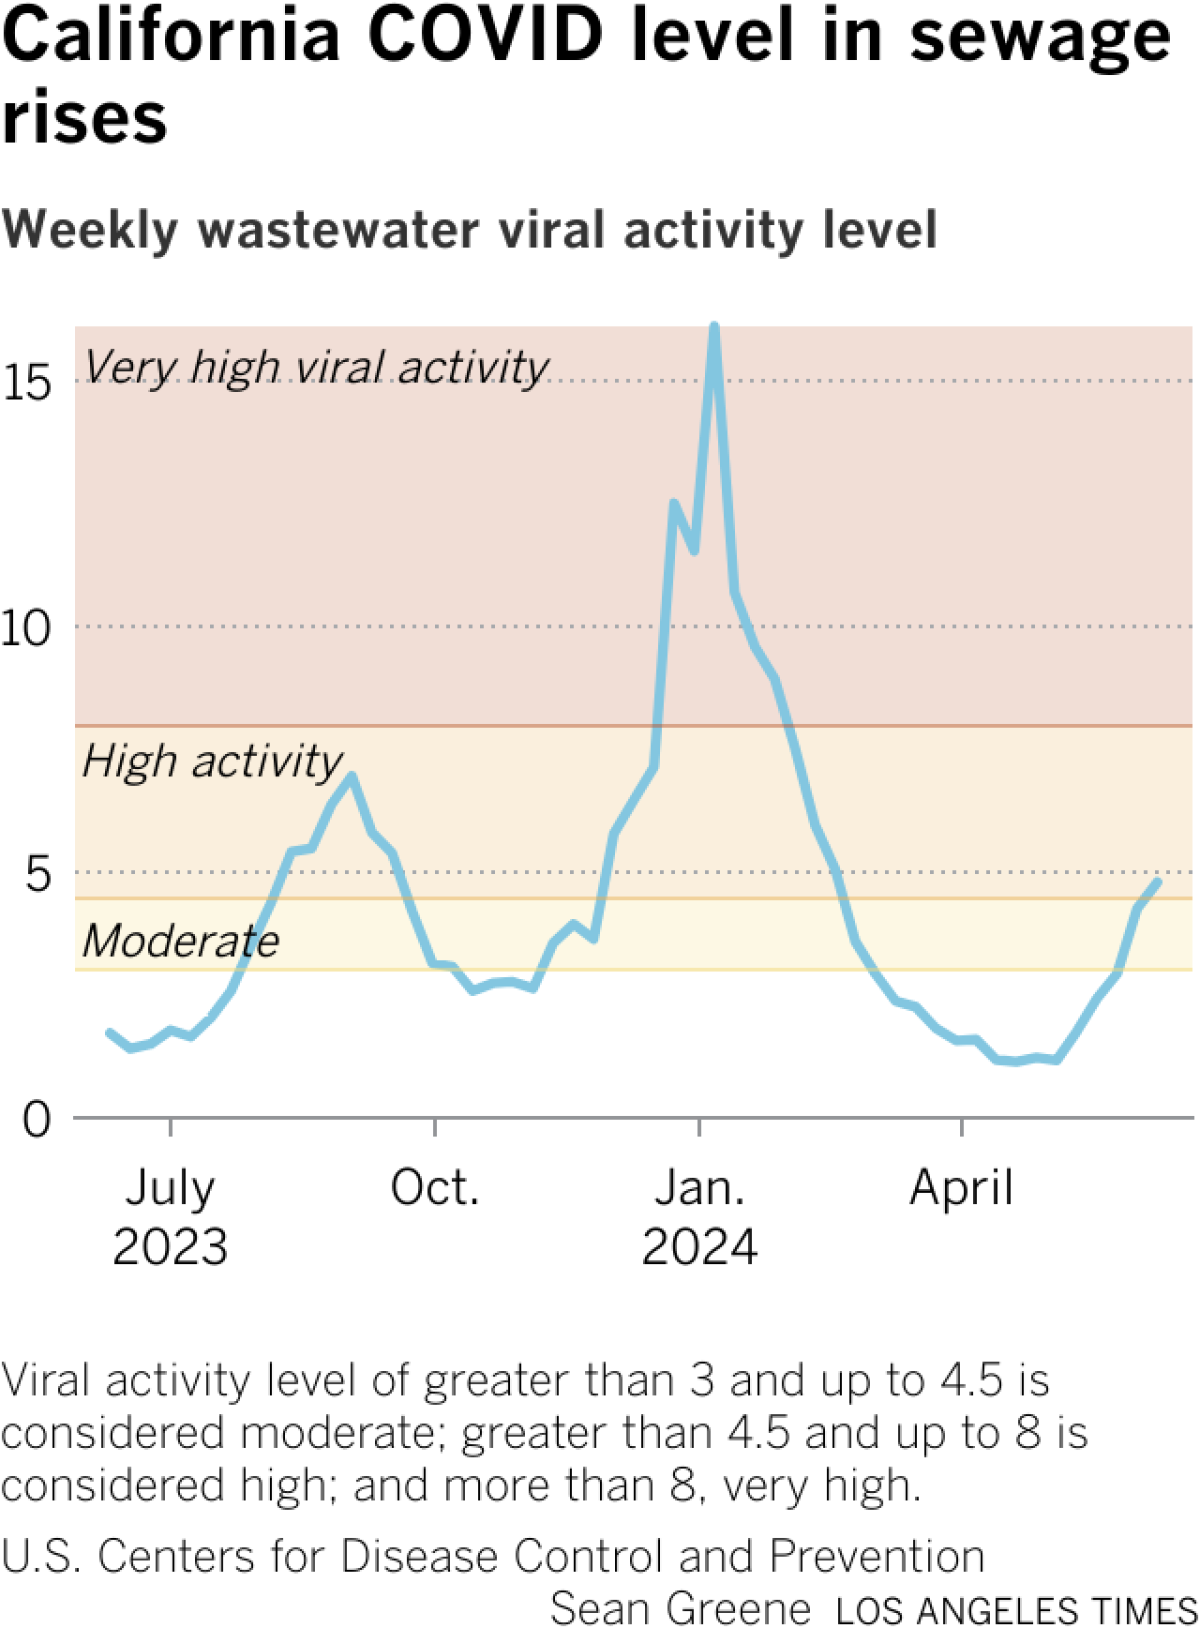 Line chart shows wastewater viral activity has been rising again since May. The last steep spike was in January.